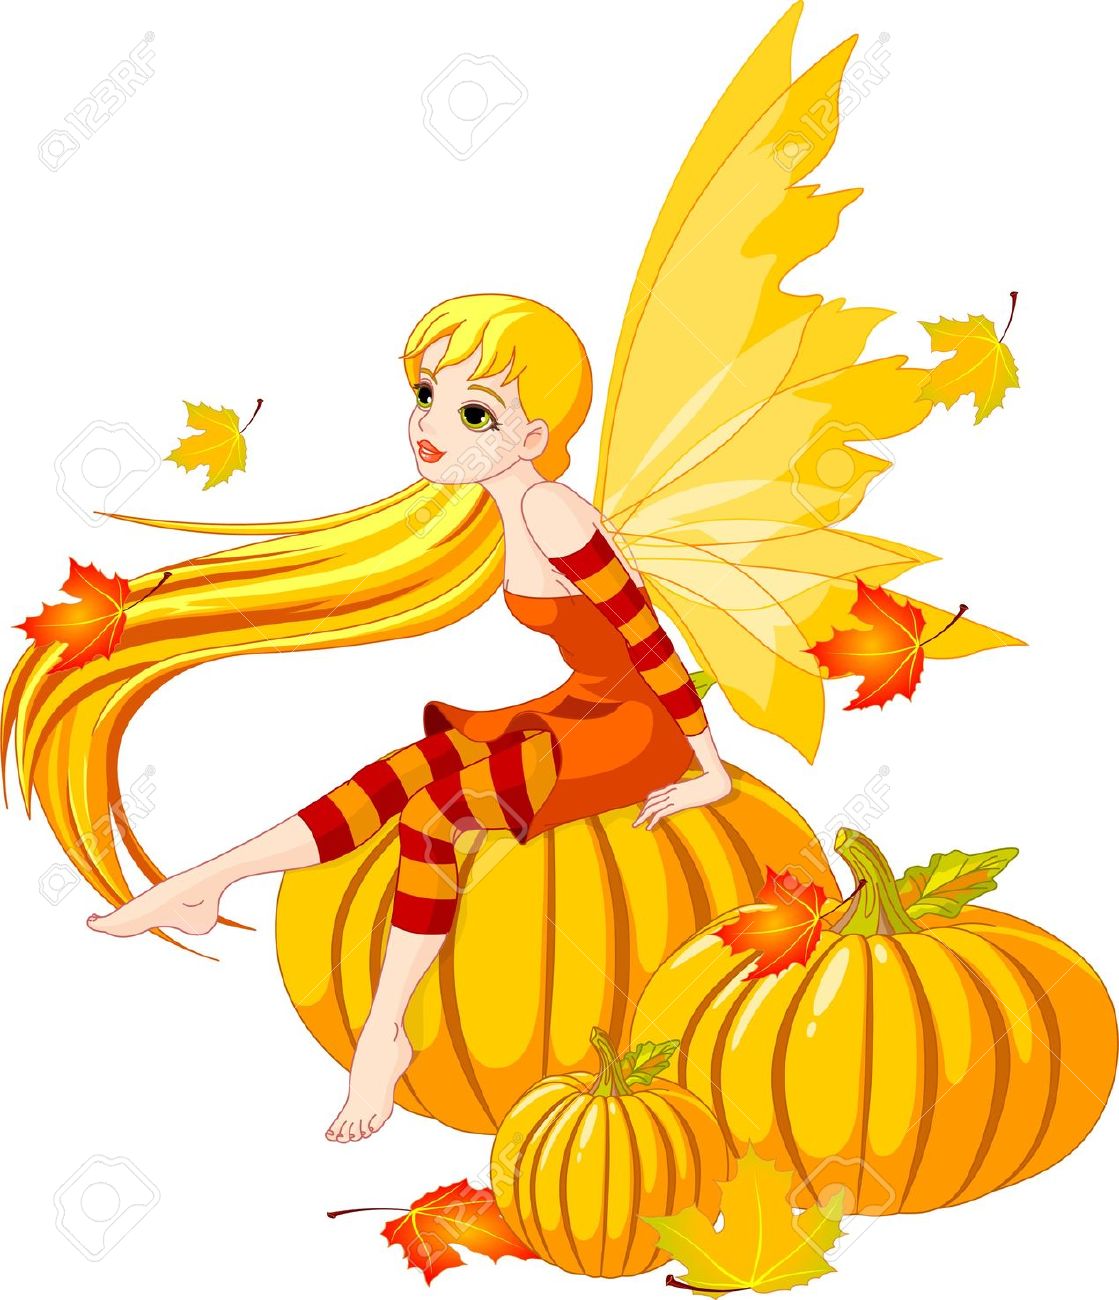 Elf Fairy clipart #9, Download drawings